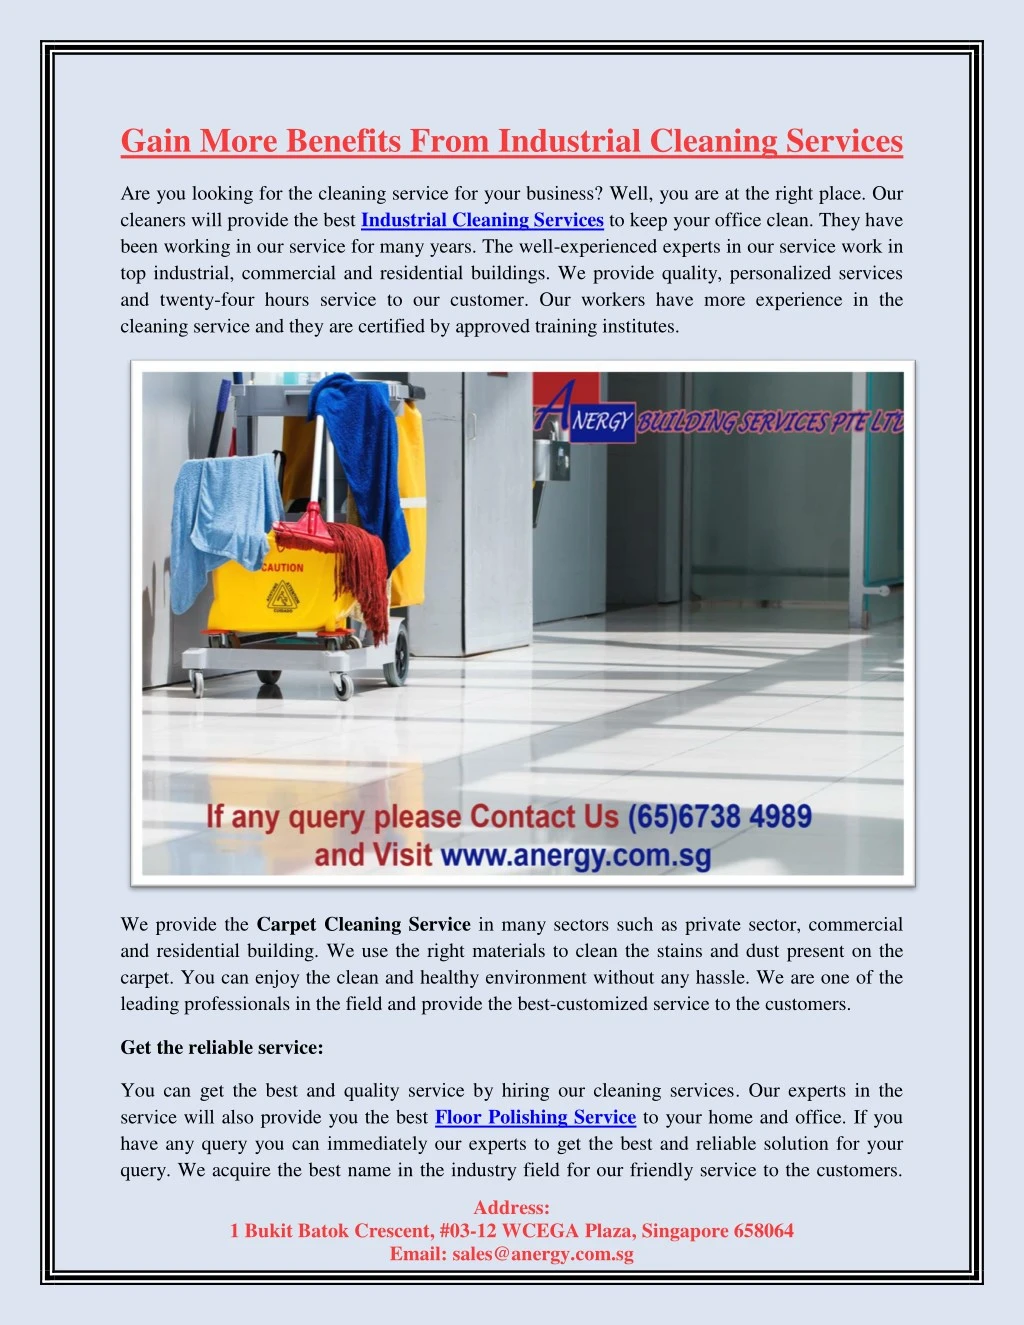 gain more benefits from industrial cleaning